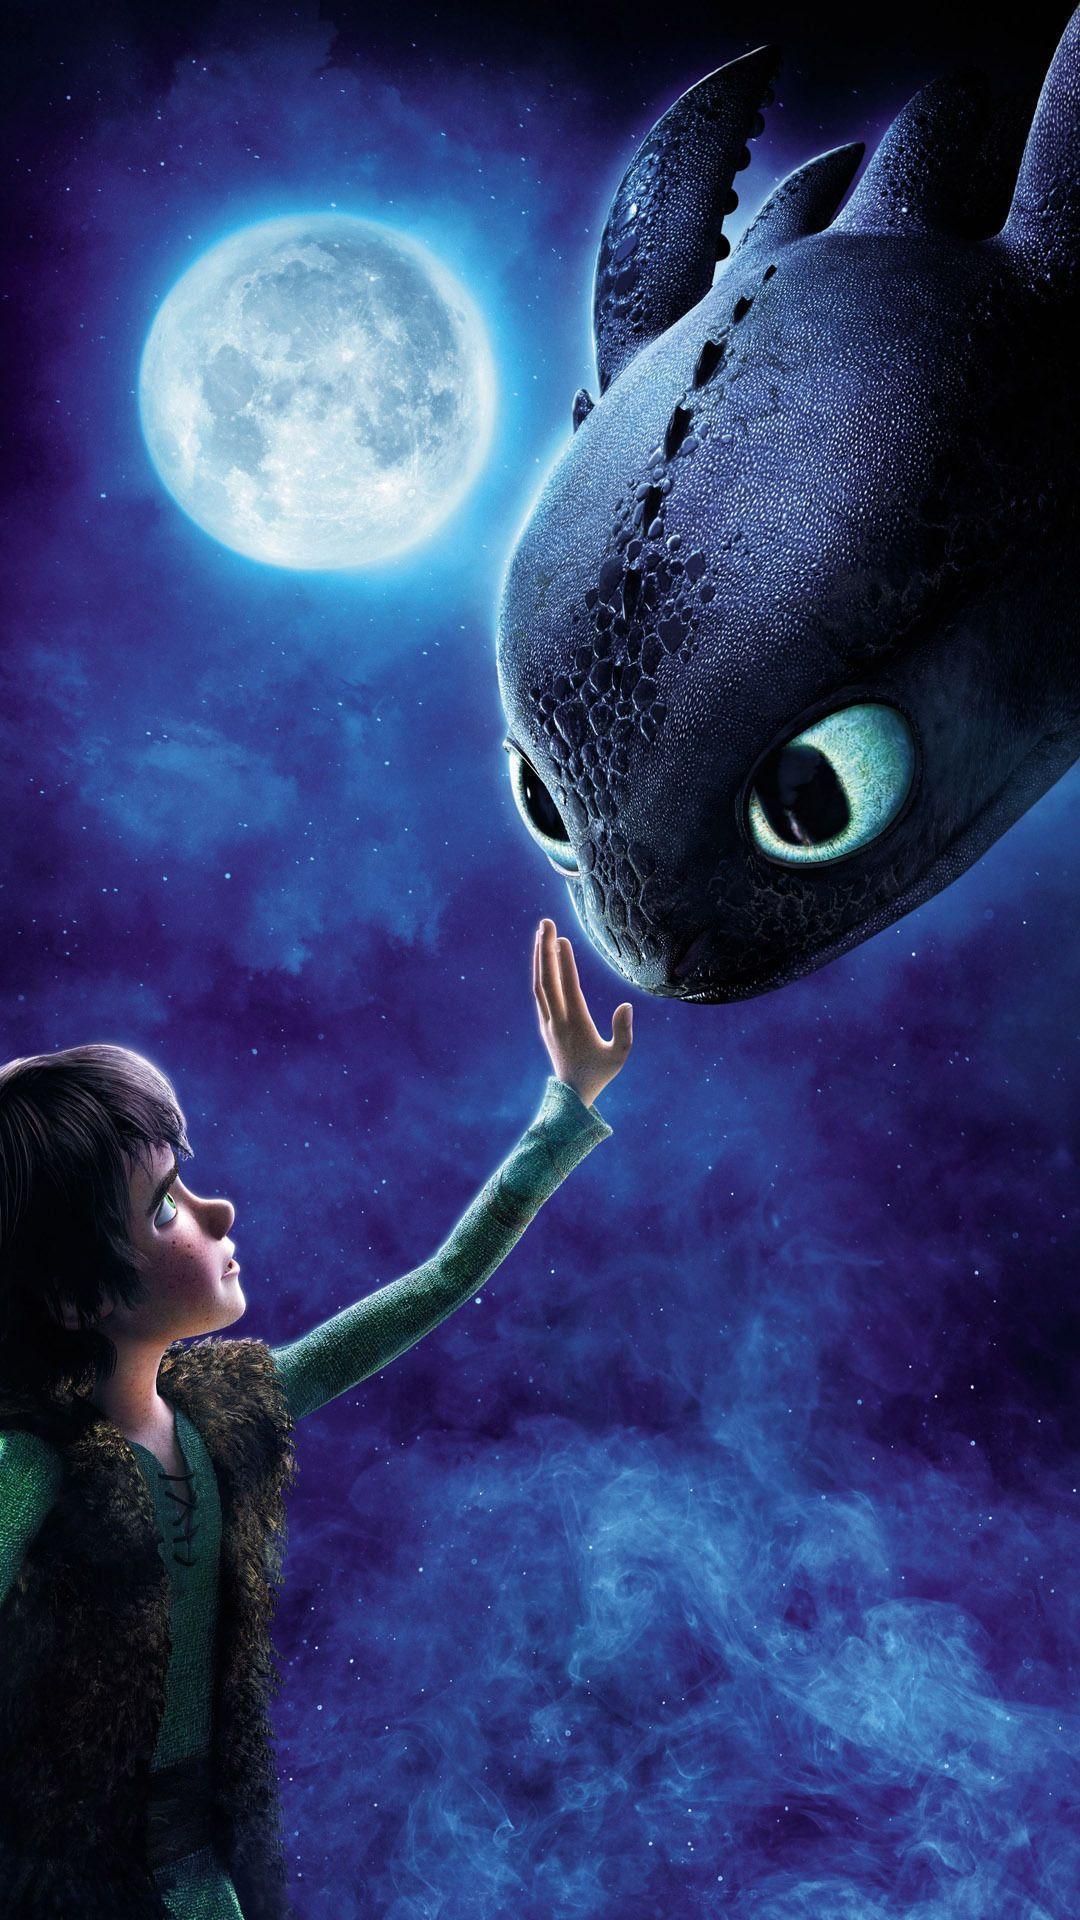 How To Train Your Dragon Mobile Wallpaper 10591. Dreamworks